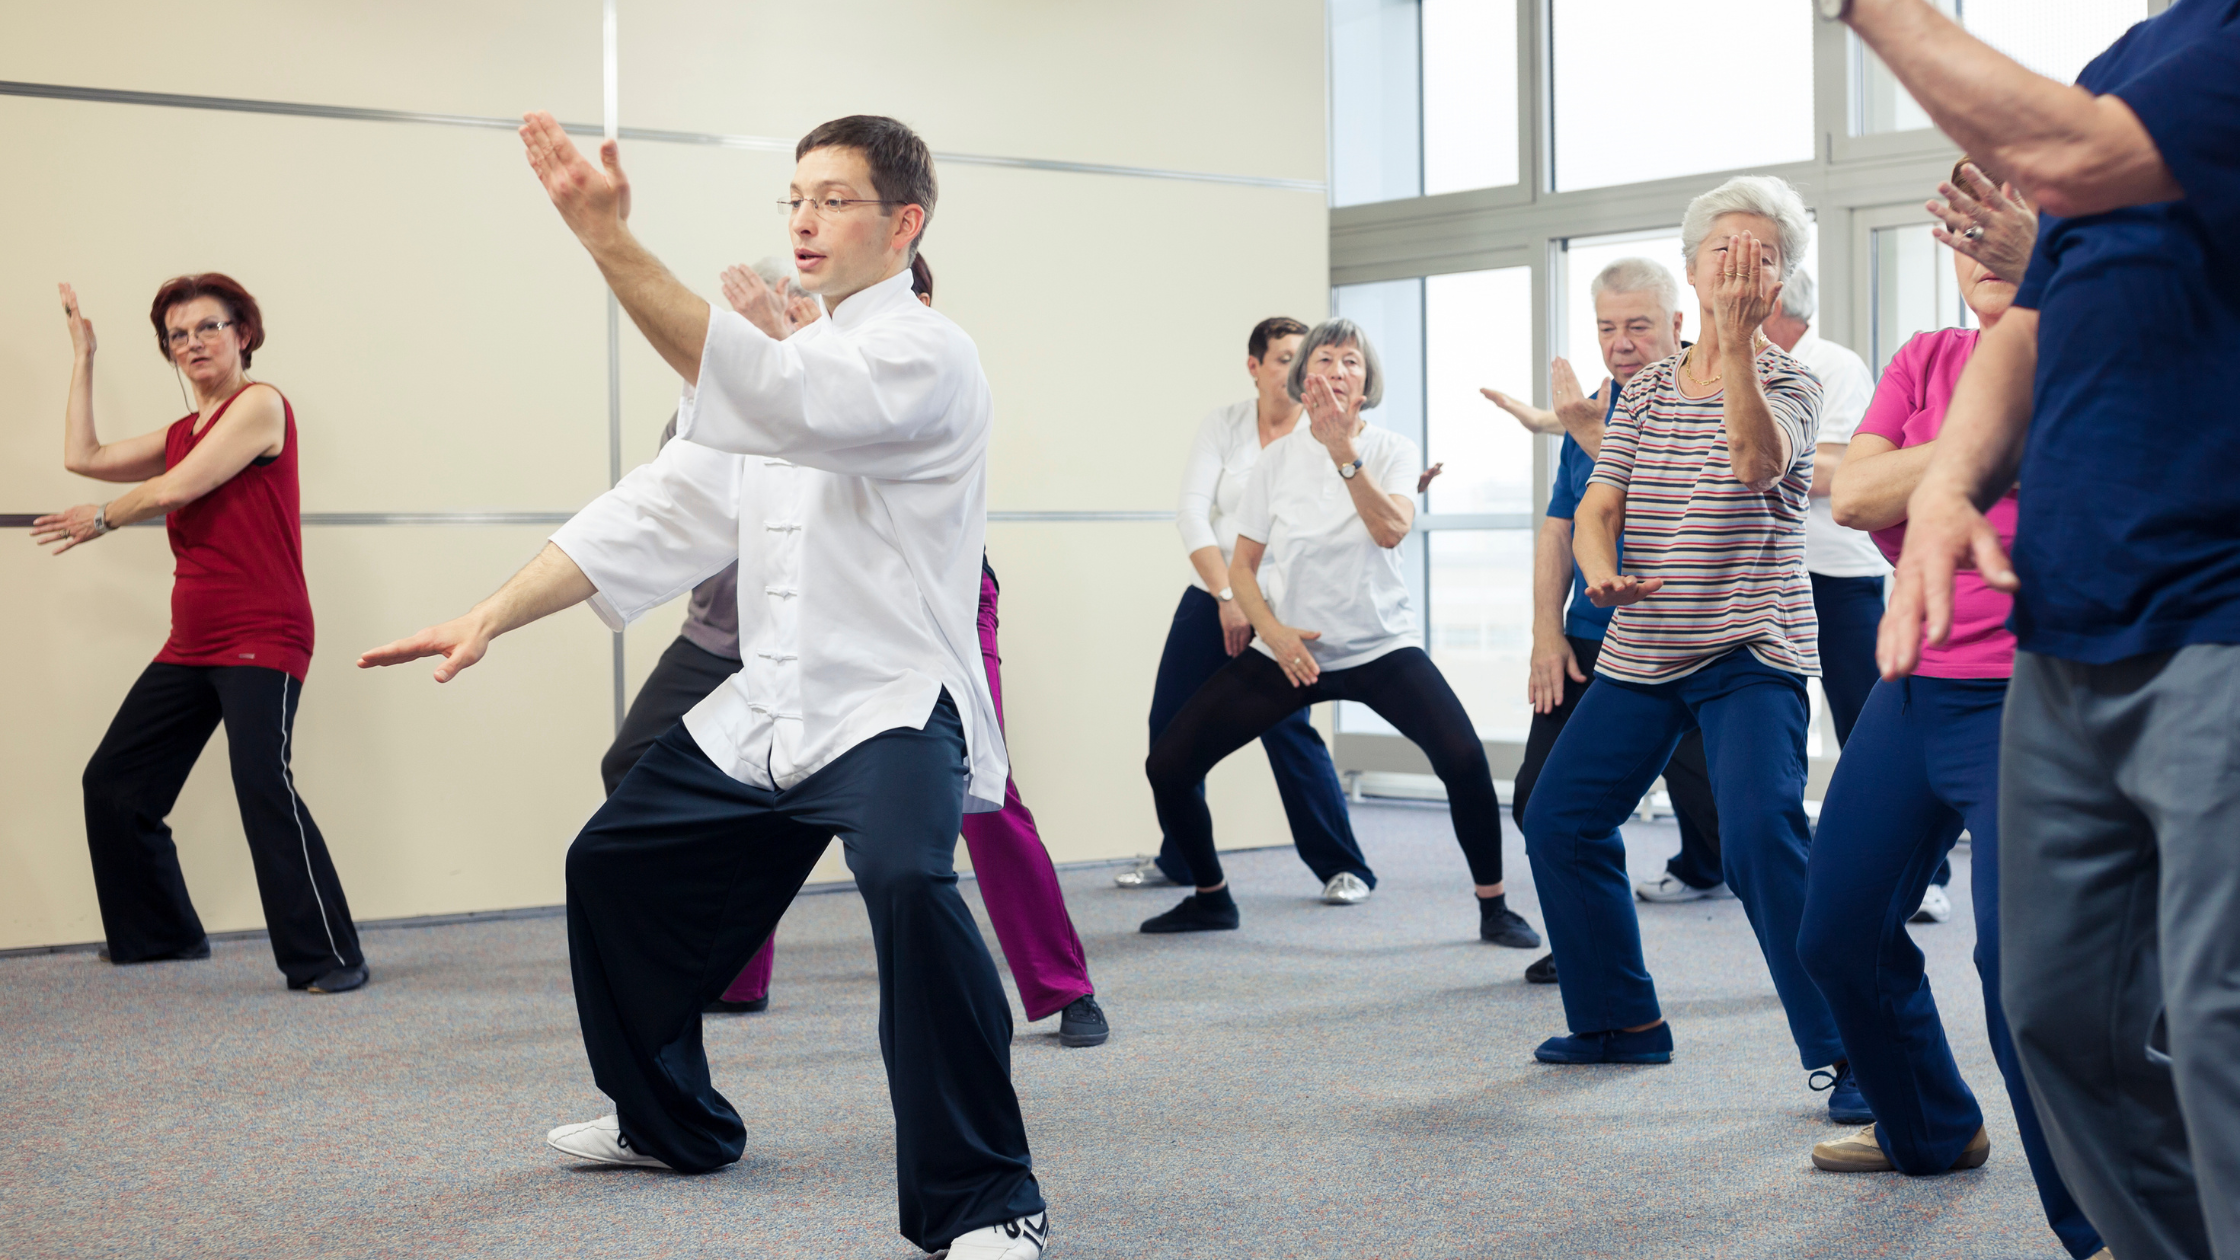 senior tai chi class in a well-lit room